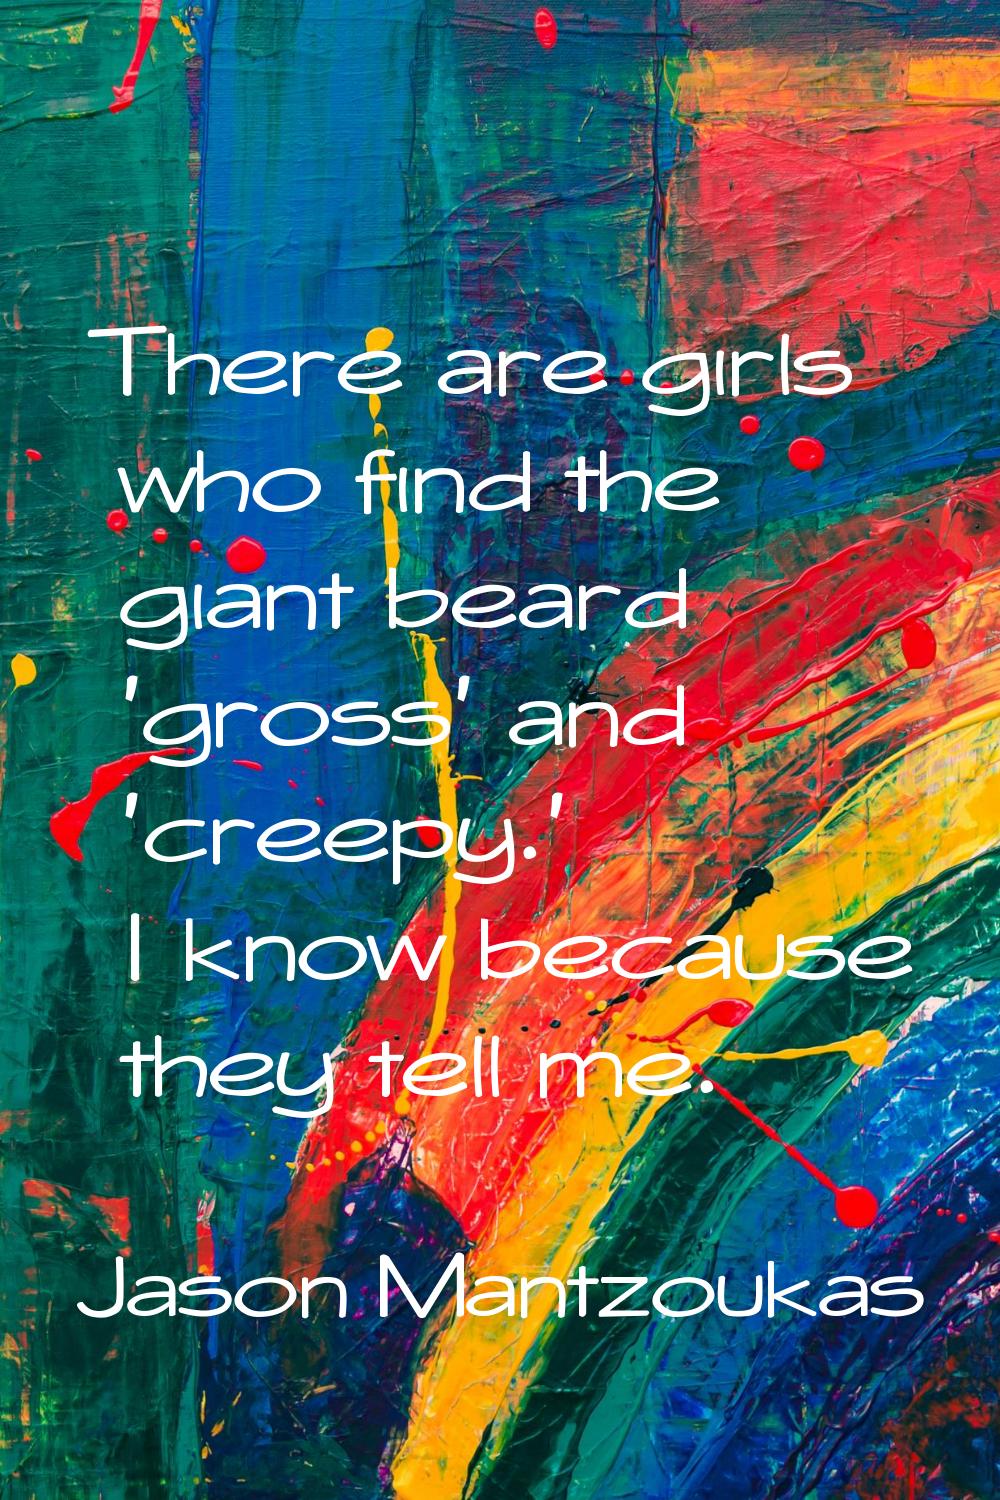 There are girls who find the giant beard 'gross' and 'creepy.' I know because they tell me.